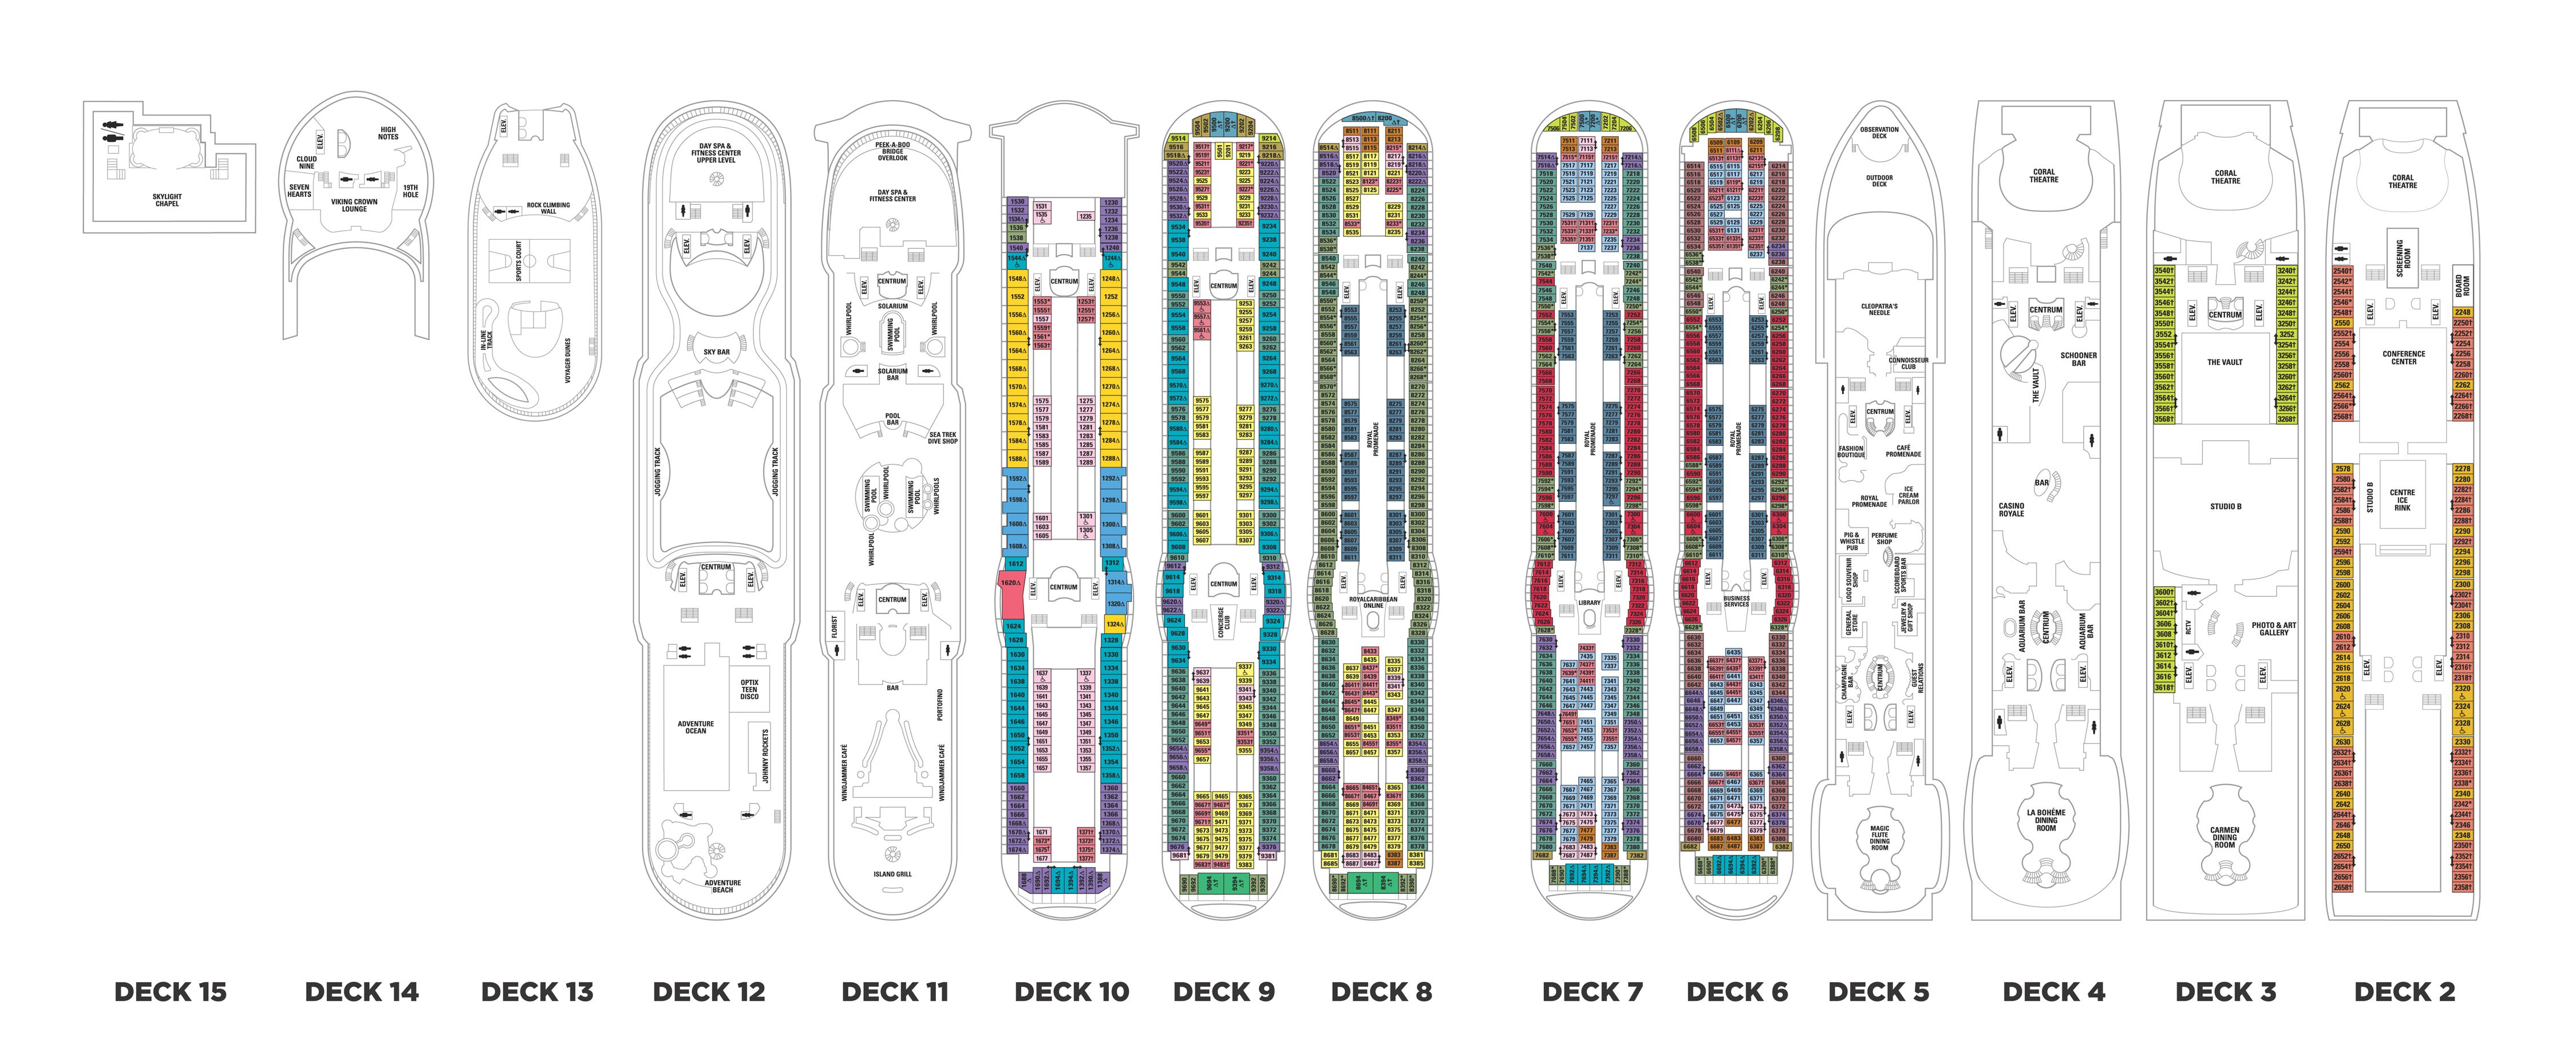 RCL Voyager of the Seas deck